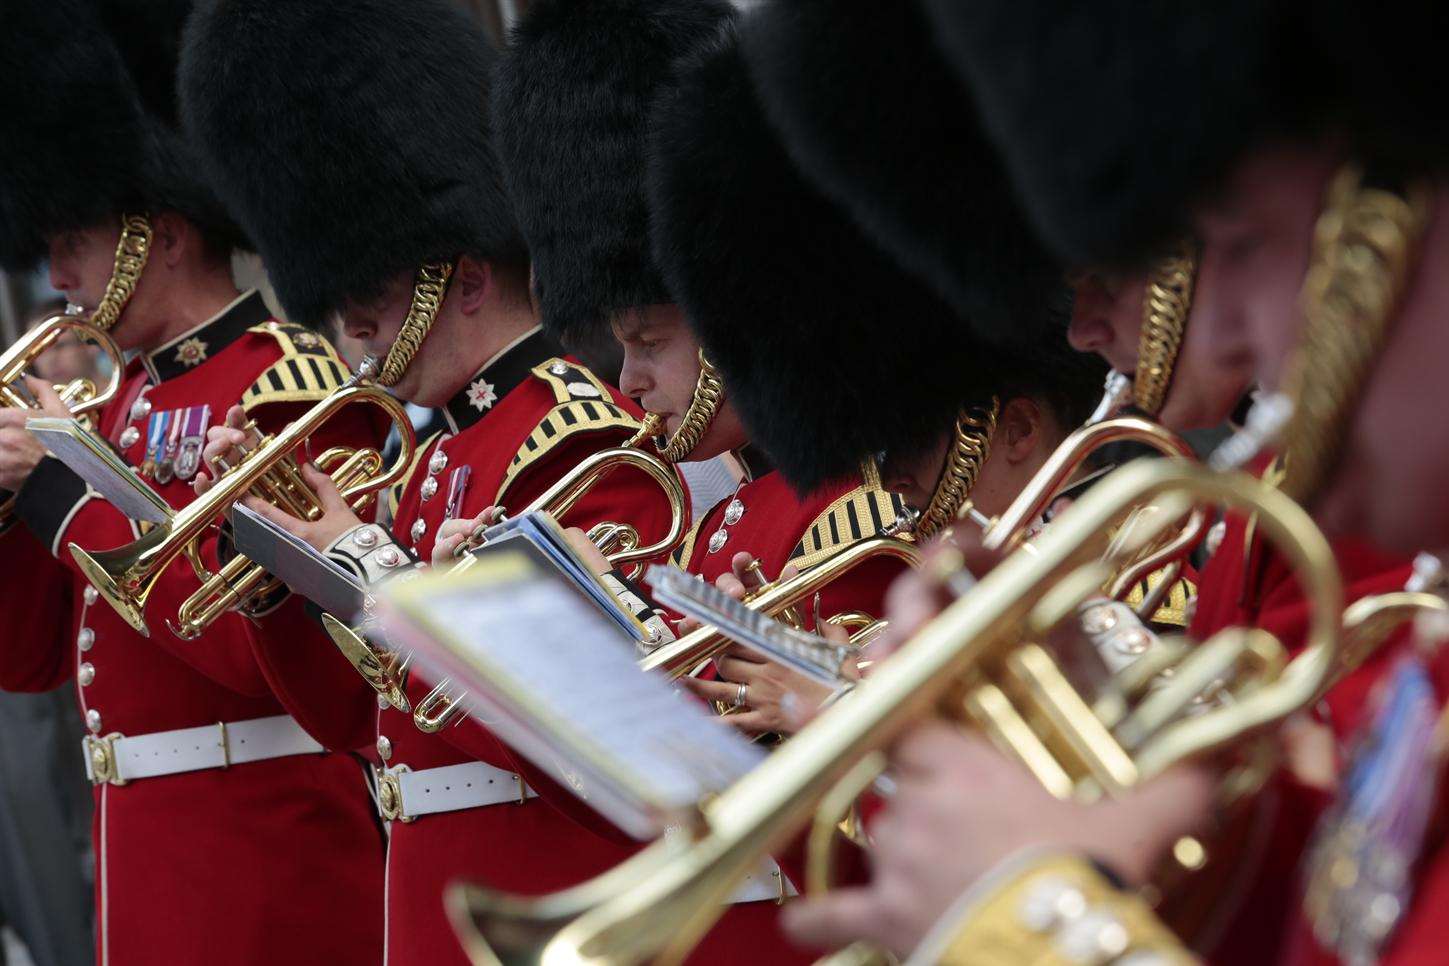 Strike up the band to raise funds for injured Guardsmen